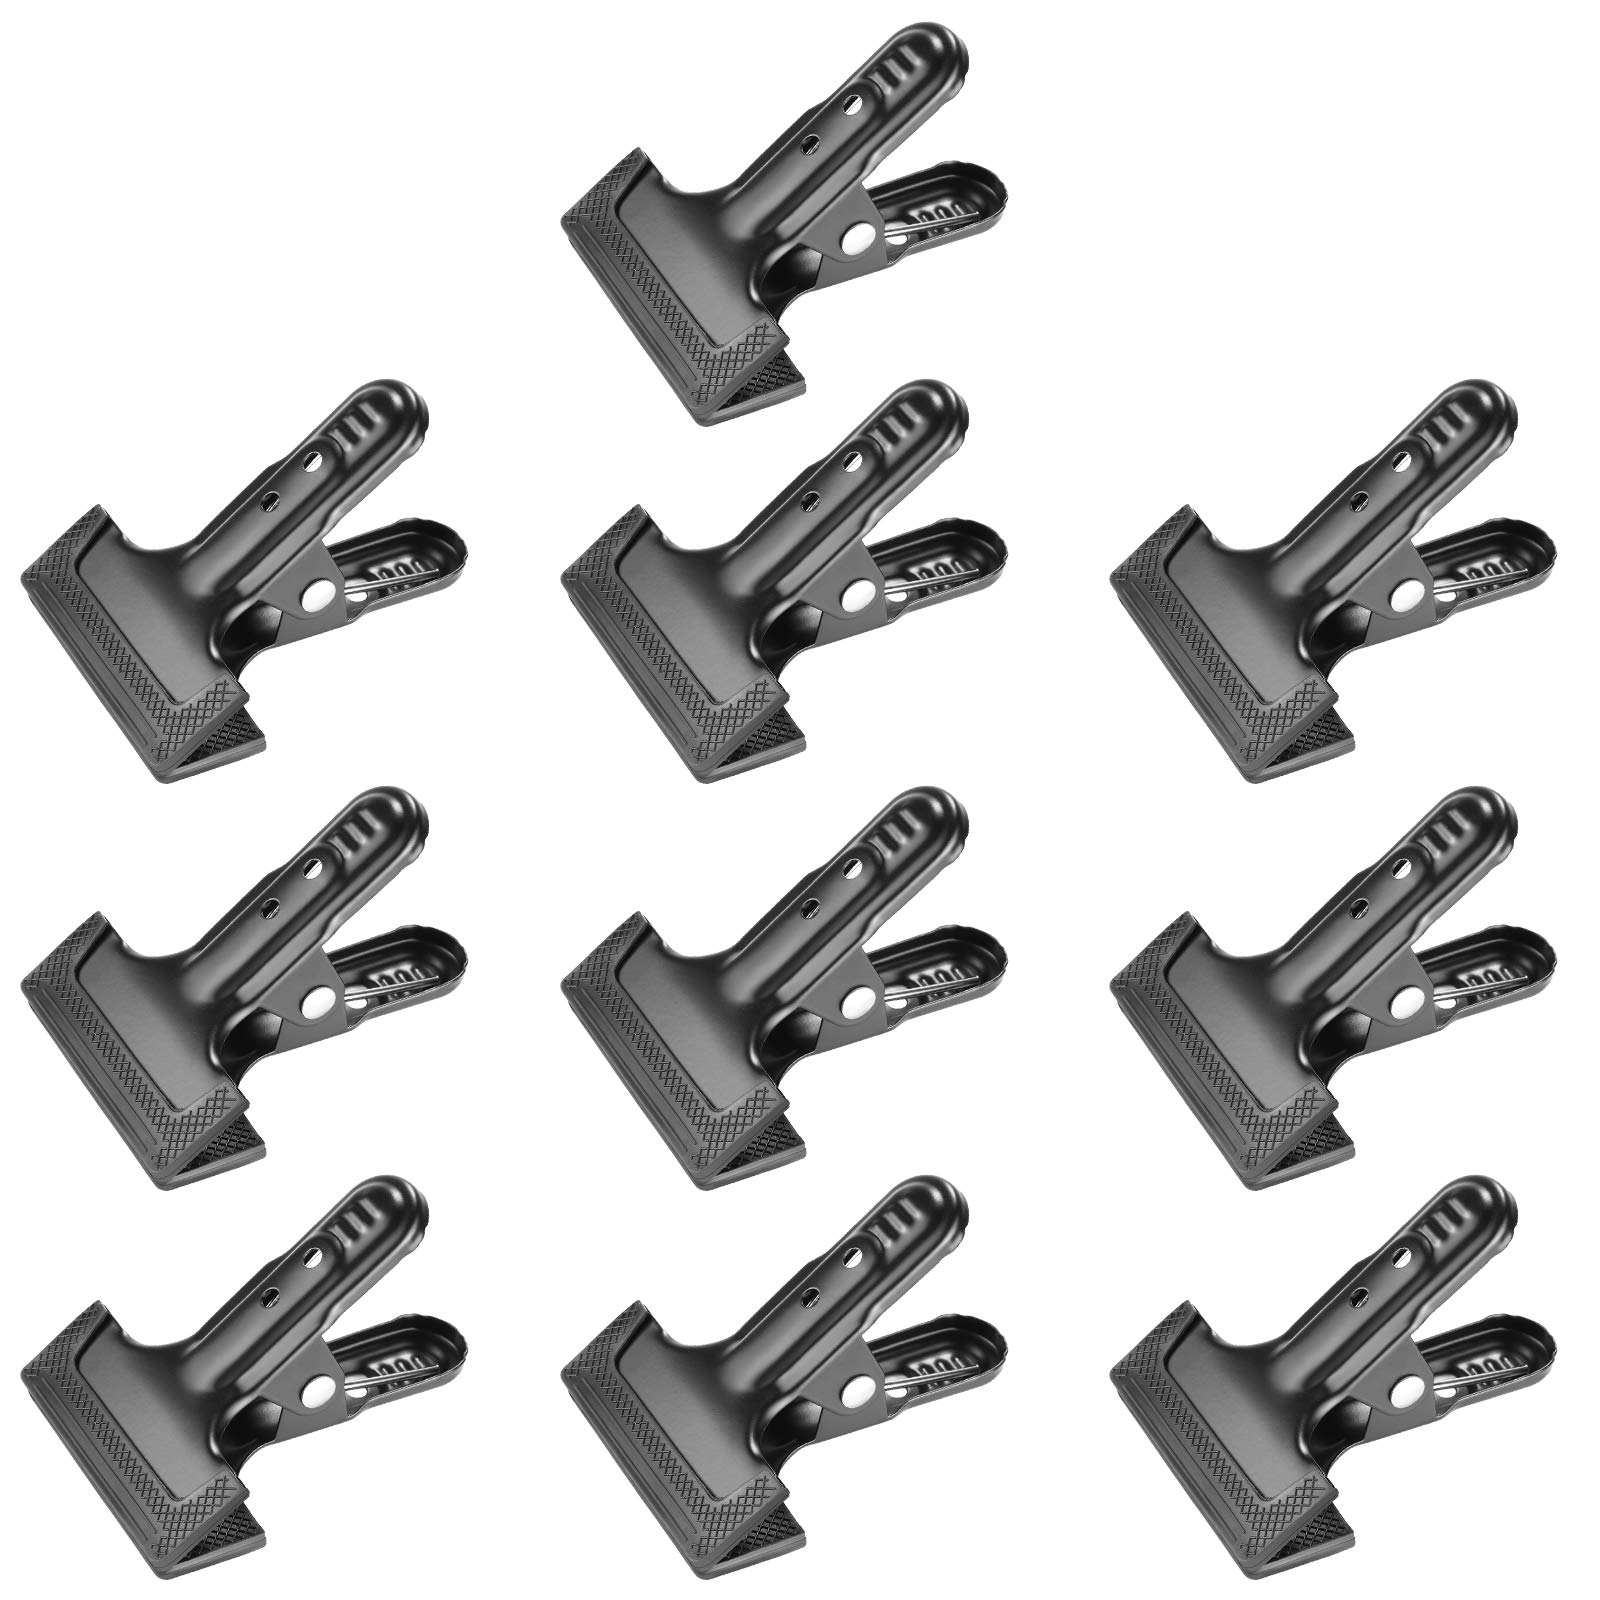 The Body and Roots 10-Pack 4 inch Spring Clamps Heavy Duty - Plastic Clamps  for Crafts, Photography, Woodworking - Backdrop Clips clamps for Backdrop